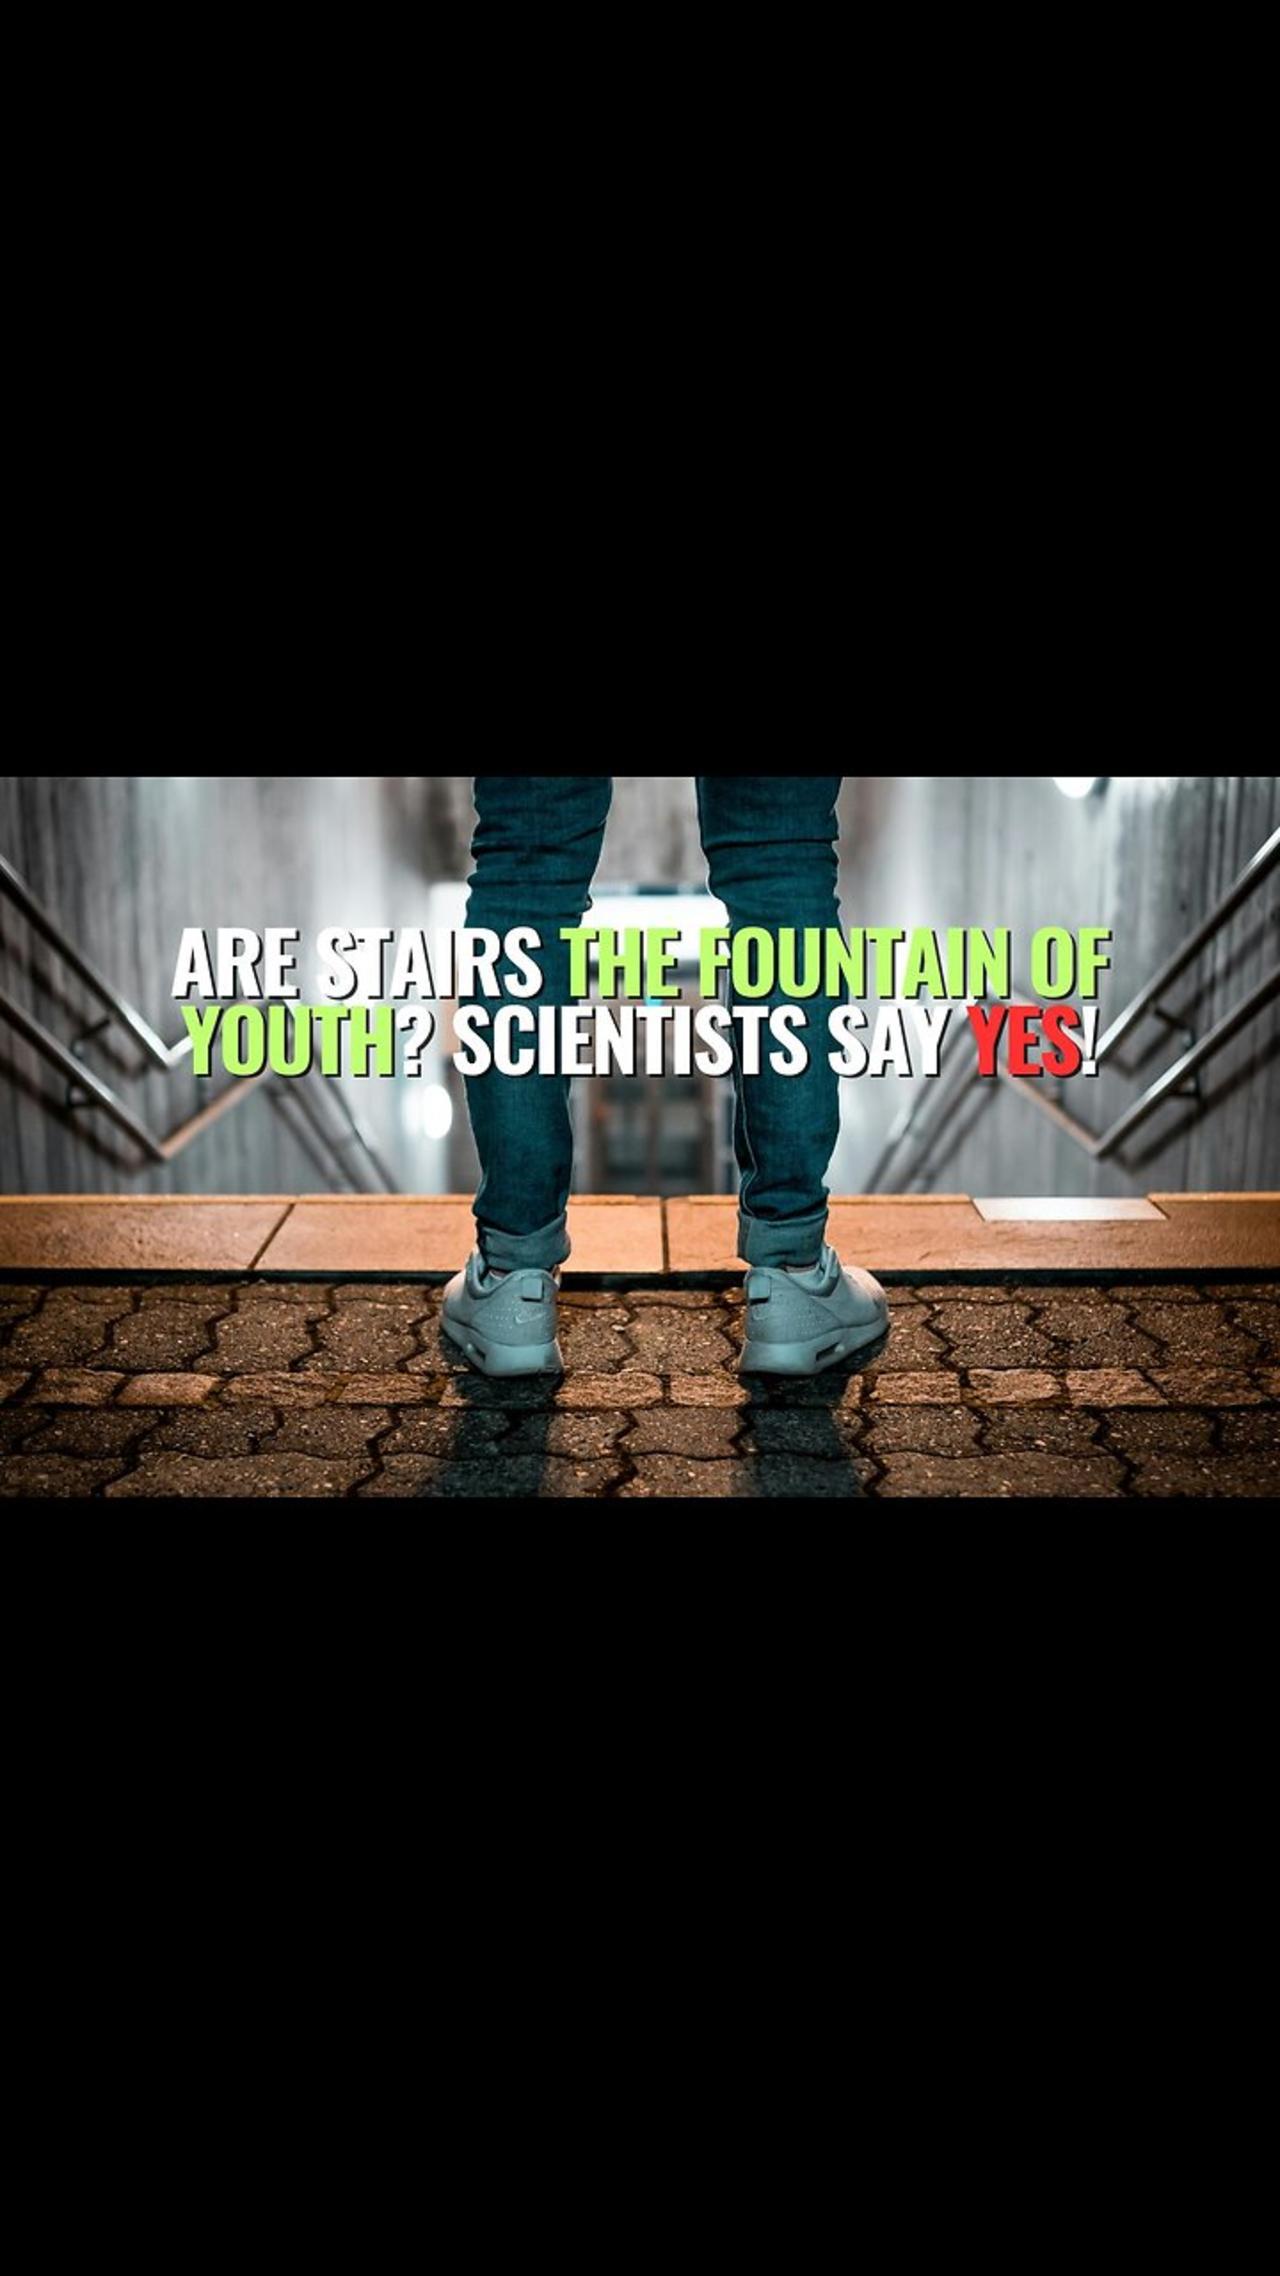 Are Stairs the Fountain of Youth? Scientists Say Yes!